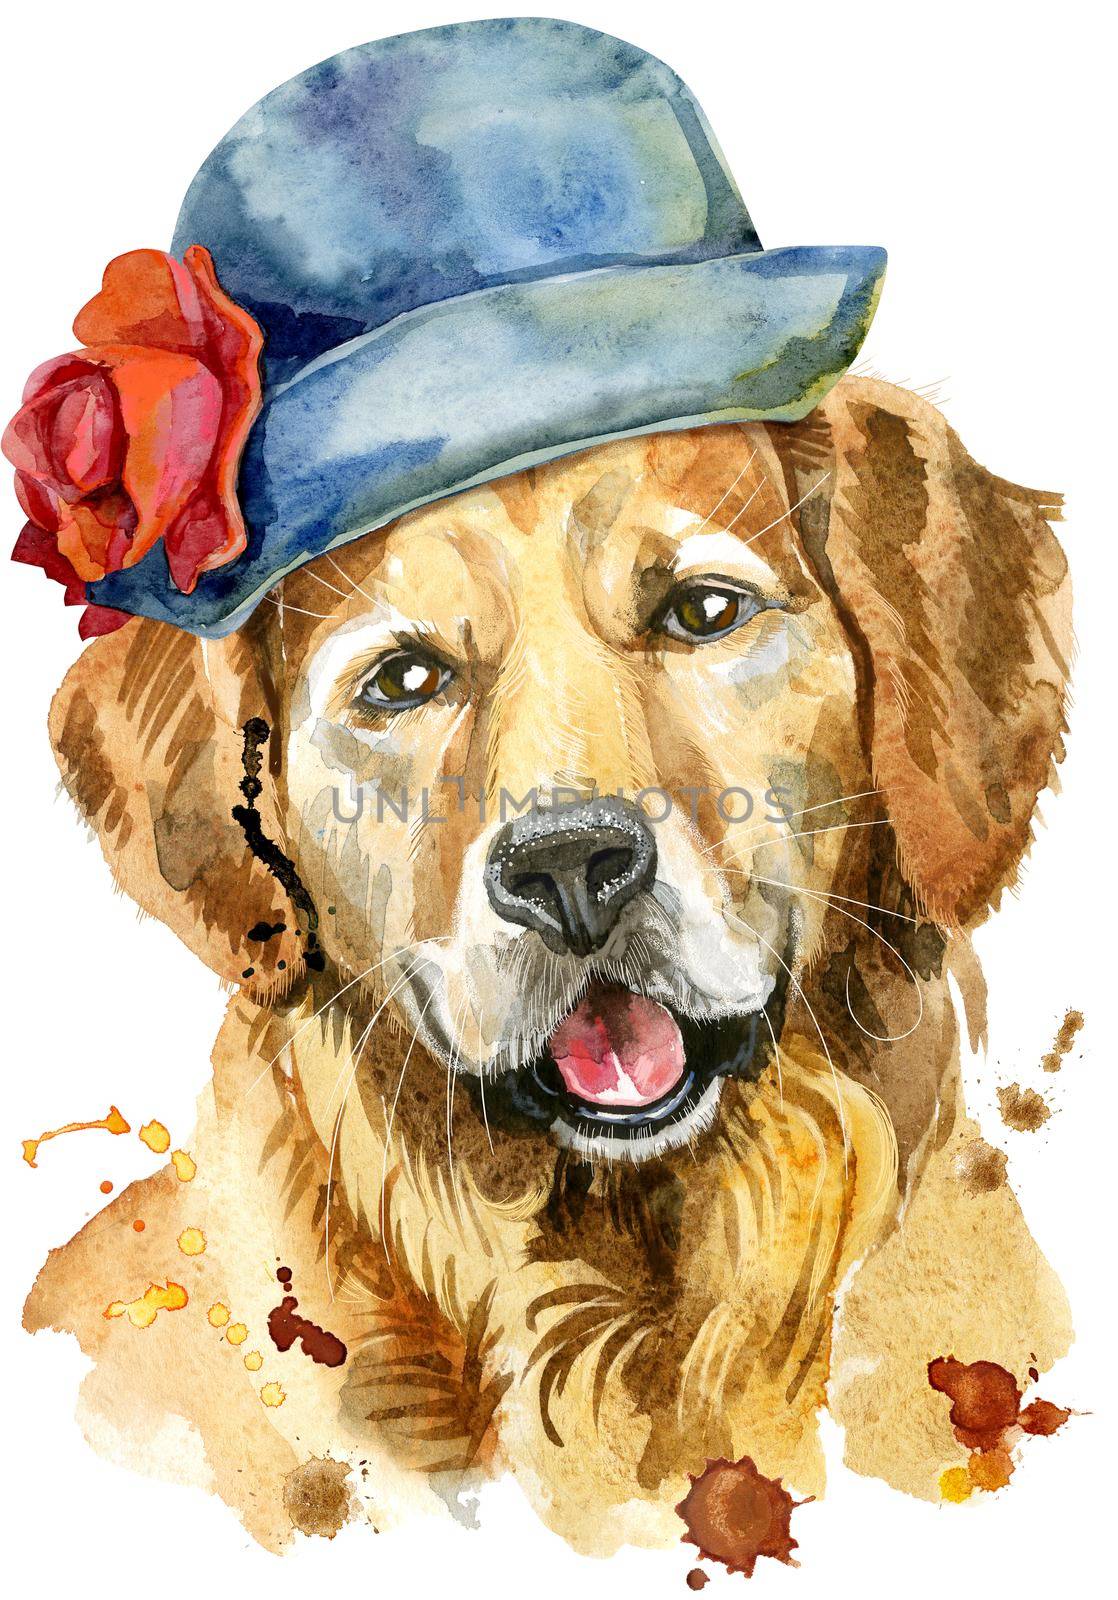 Cute Dog in a gray hat with a red flower. Dog T-shirt graphics. watercolor golden retriever illustration